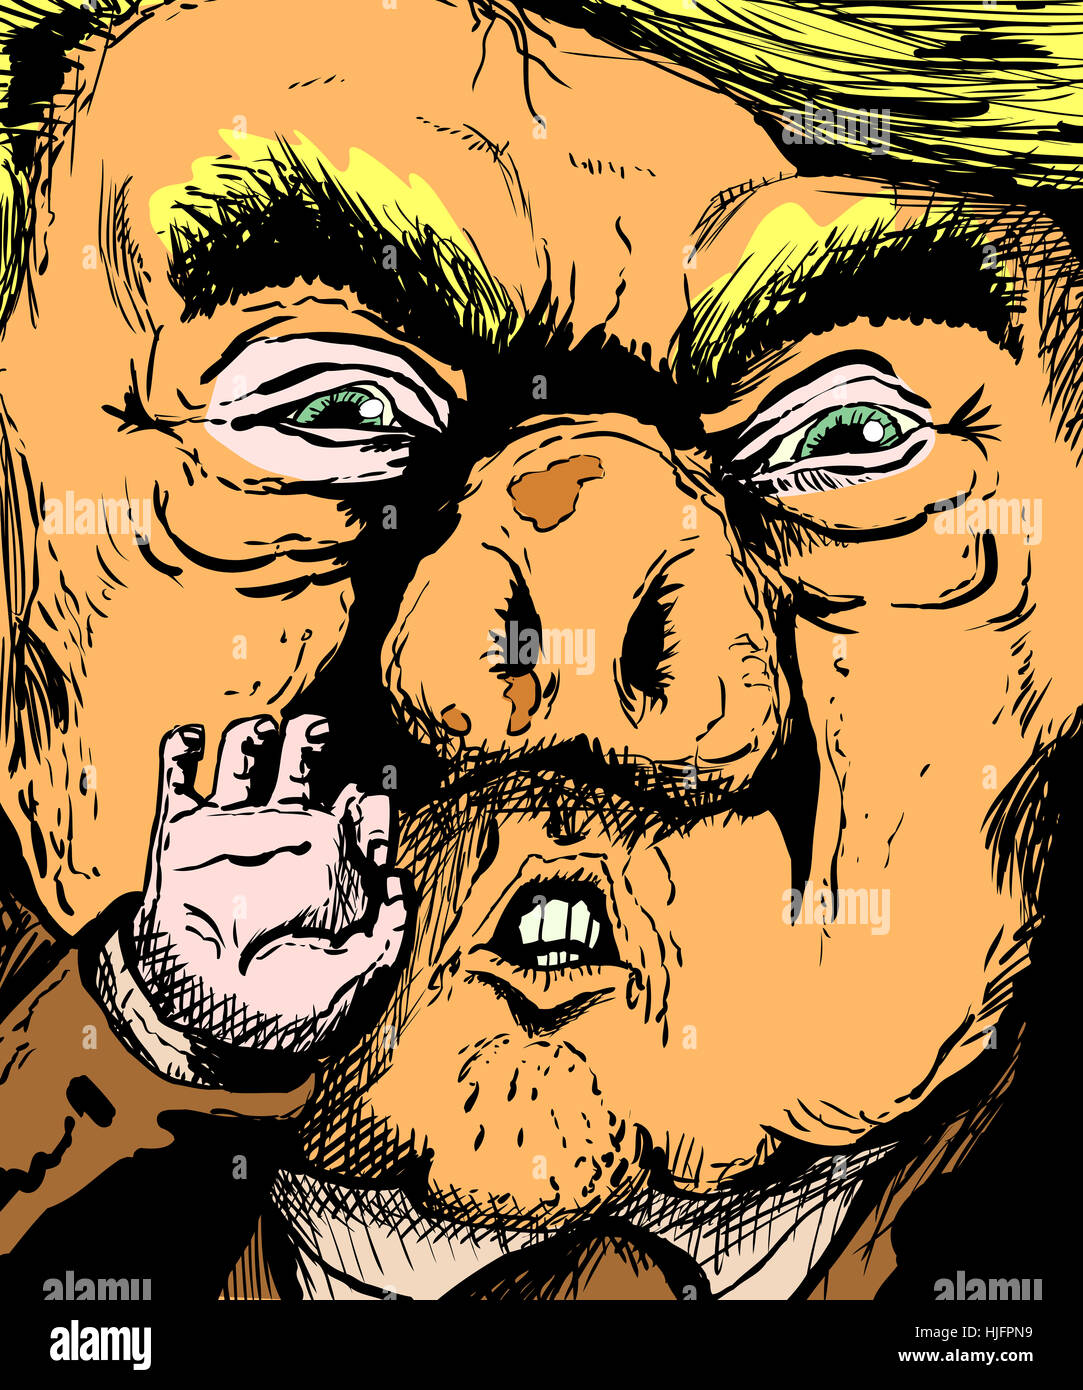 January 23, 2017. Caricature of orange skinned Donald Trump with pig nose Stock Photo